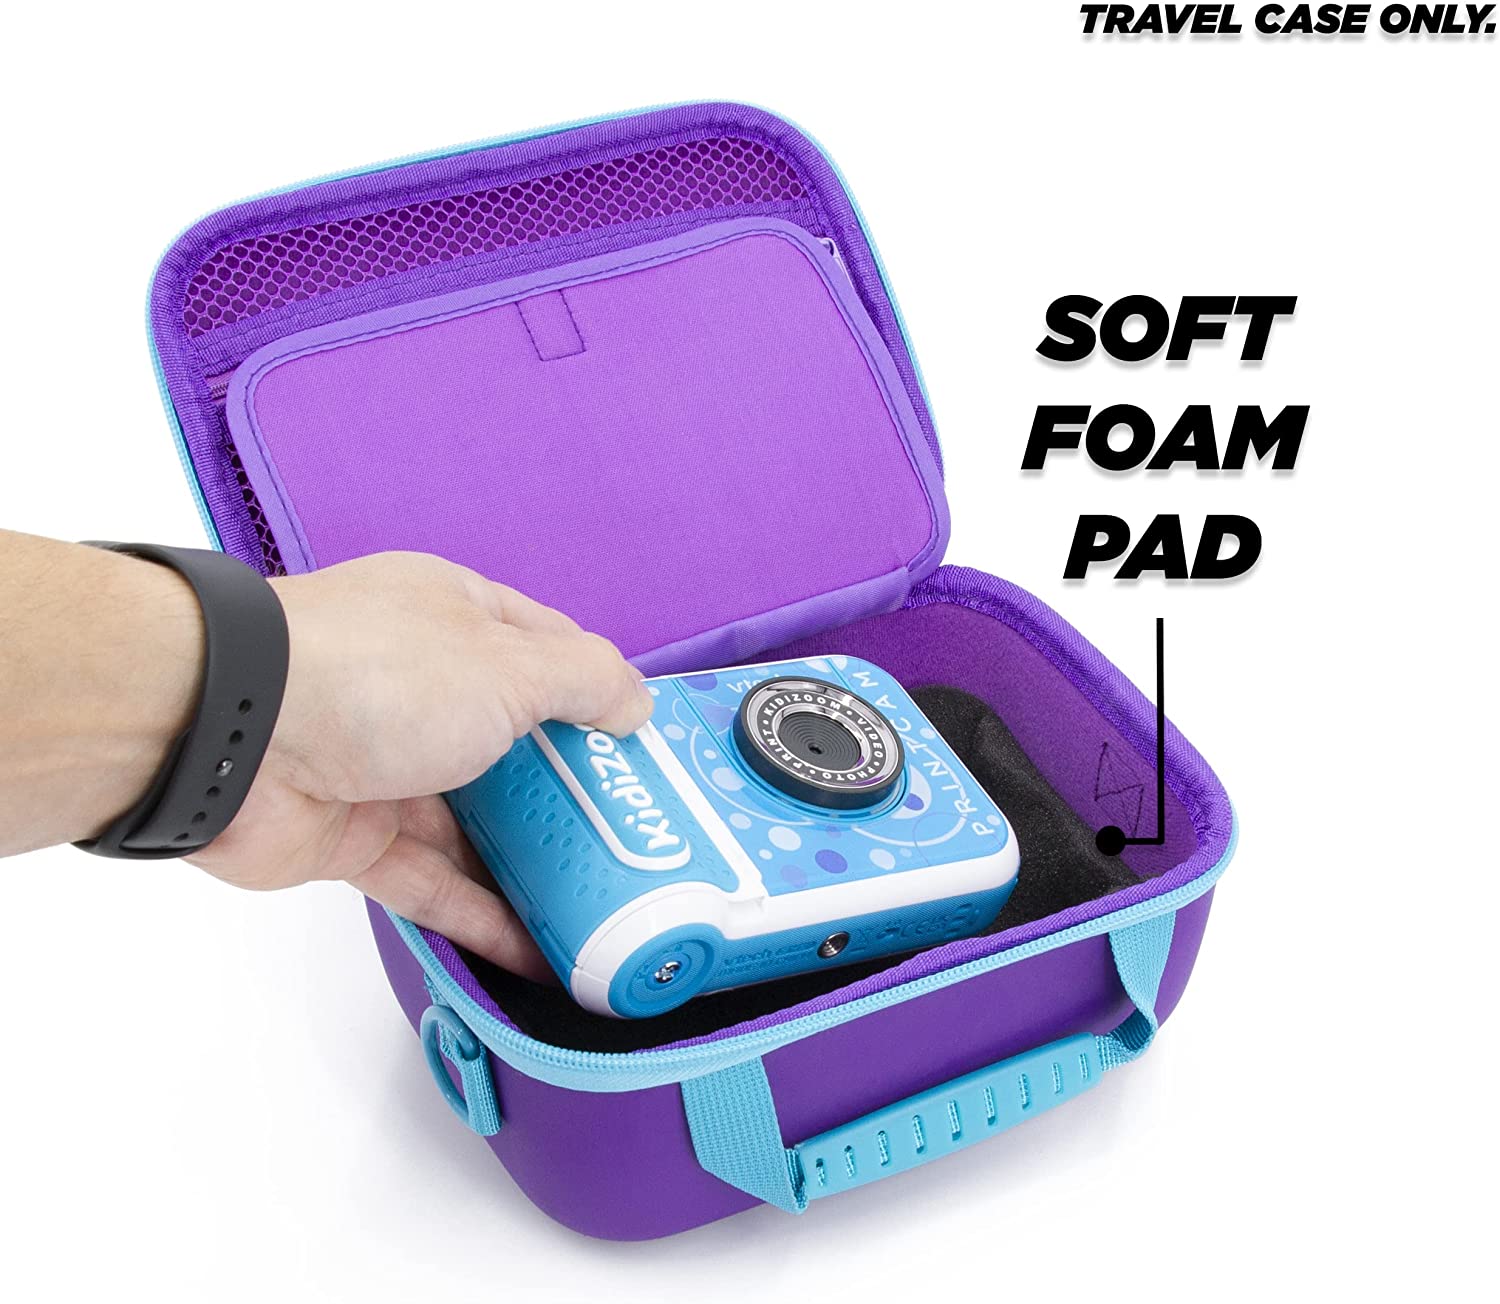 Casematix Blue Toy Camera Case for Vtech Kidizoom Camera Pix, Twist  Connect, Duo Selfie and More Includes Case Only 